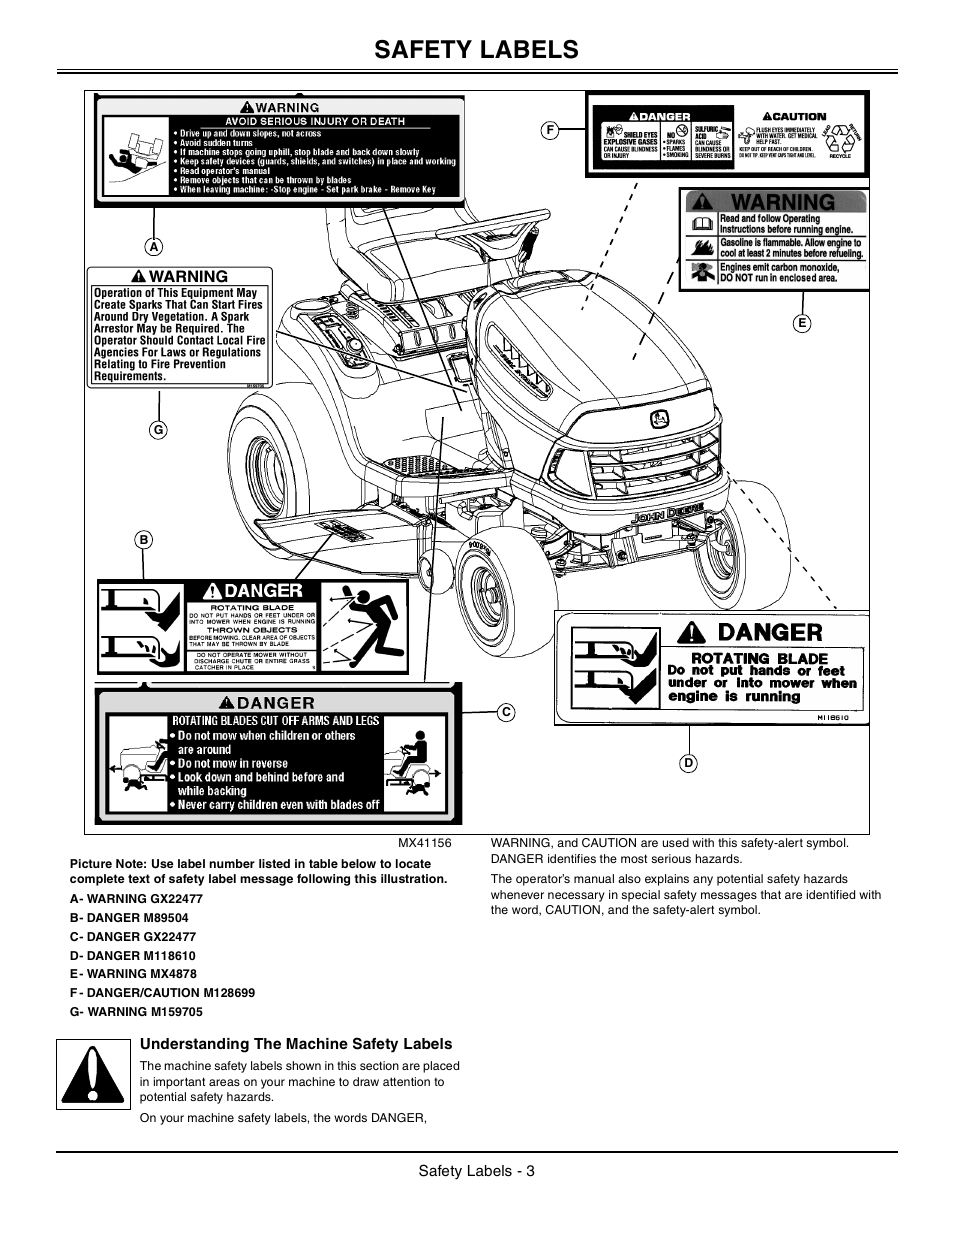 Understanding the machine safety labels, Safety labels | John Deere la105 User Manual | Page 4 / 52